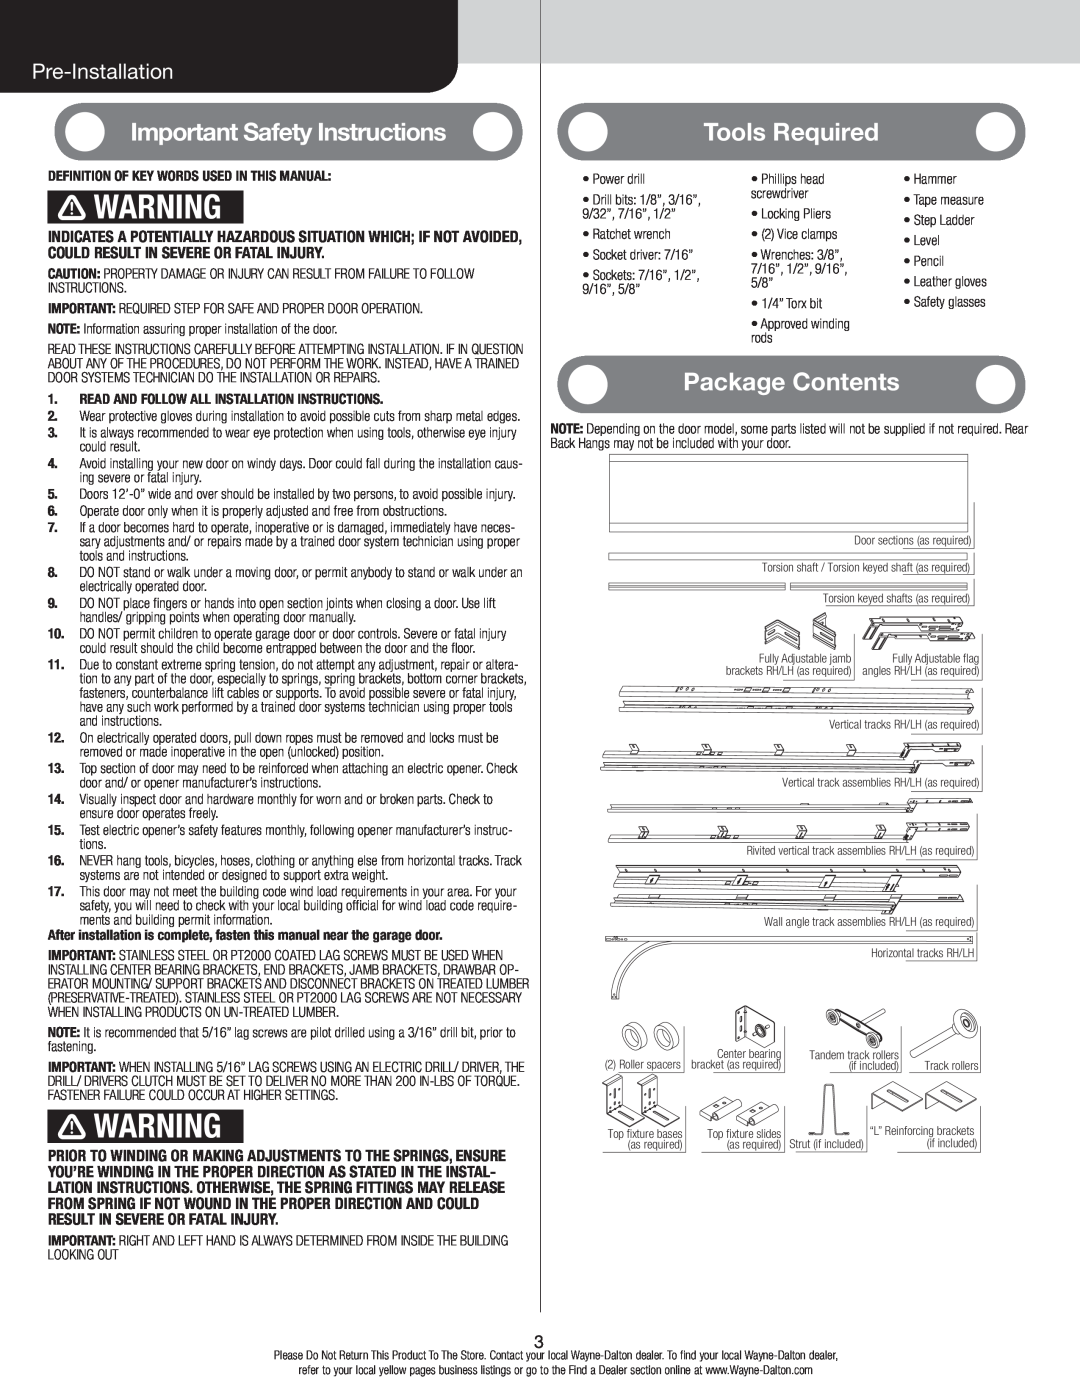 Wayne-Dalton 7100 Series Important Safety Instructions, Tools Required, Package Contents, Pre-Installation 